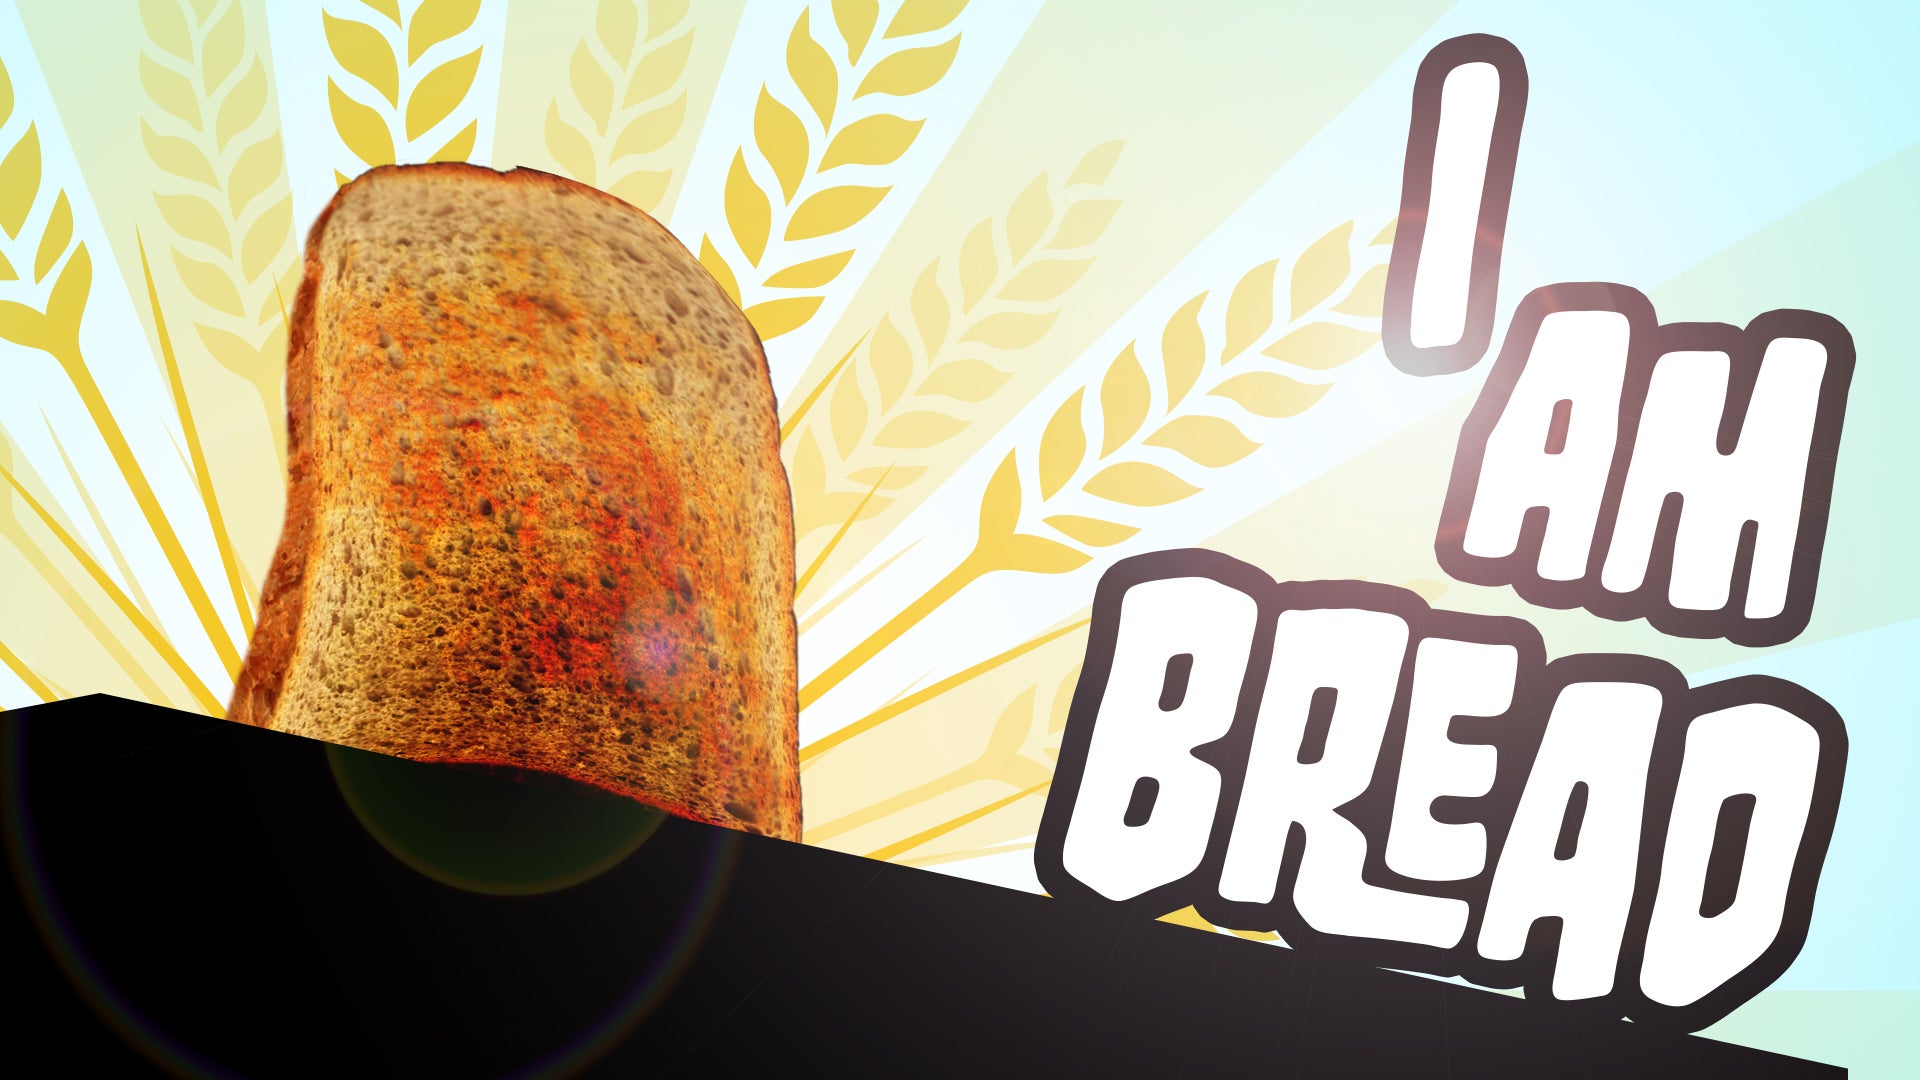 Image for This game lets you simulate what it's like being a slice of bread